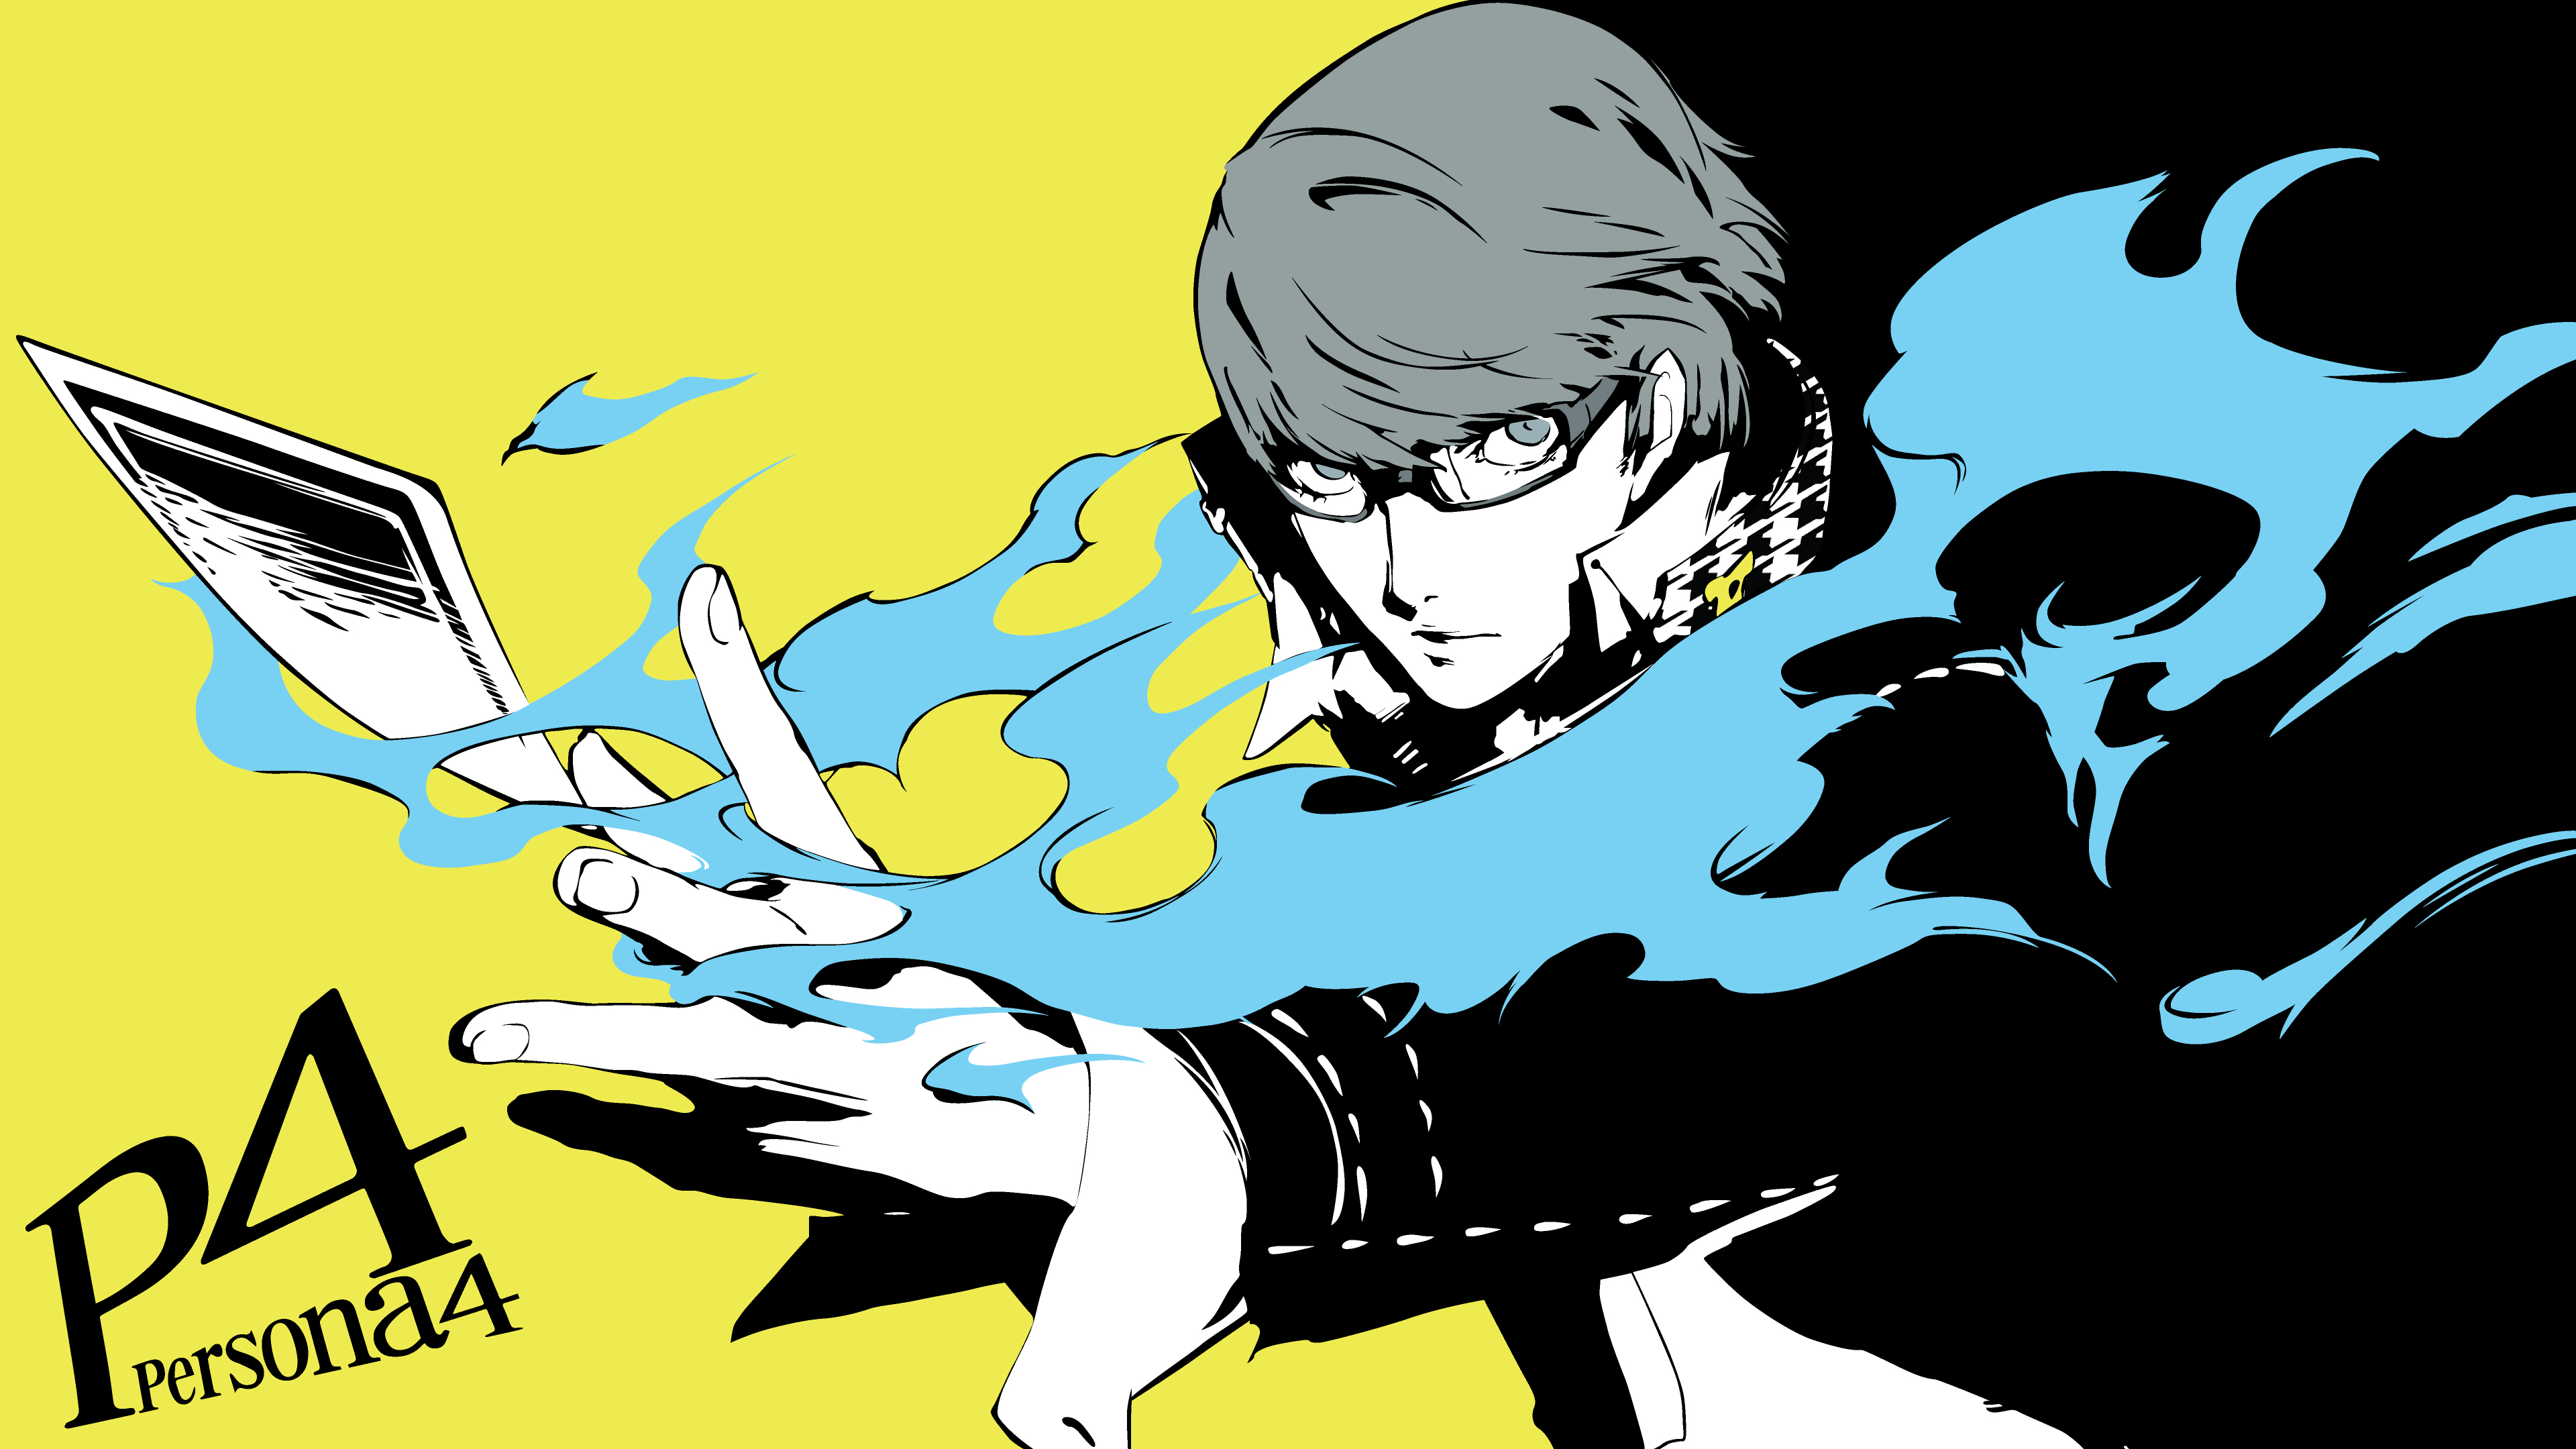 3840x2160 140+ Persona 4 HD Wallpapers and Backgrounds